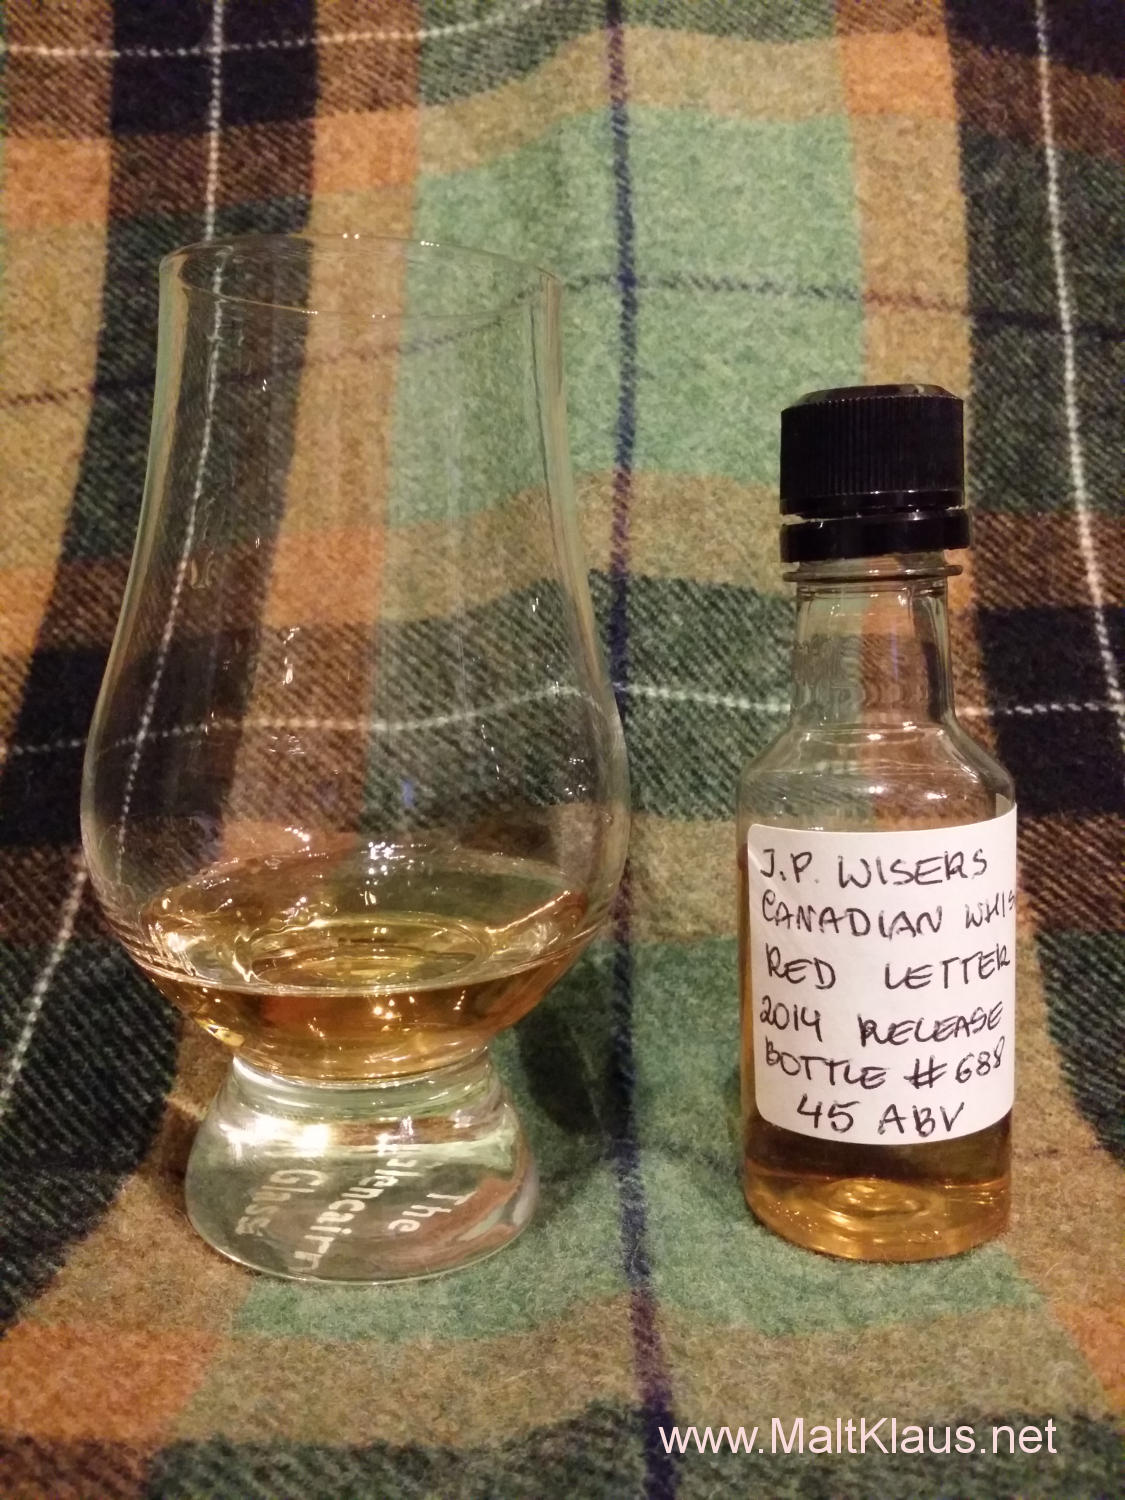 J.P. Wiser's Red Letter 10 yo 2014 release Canadian Whisky